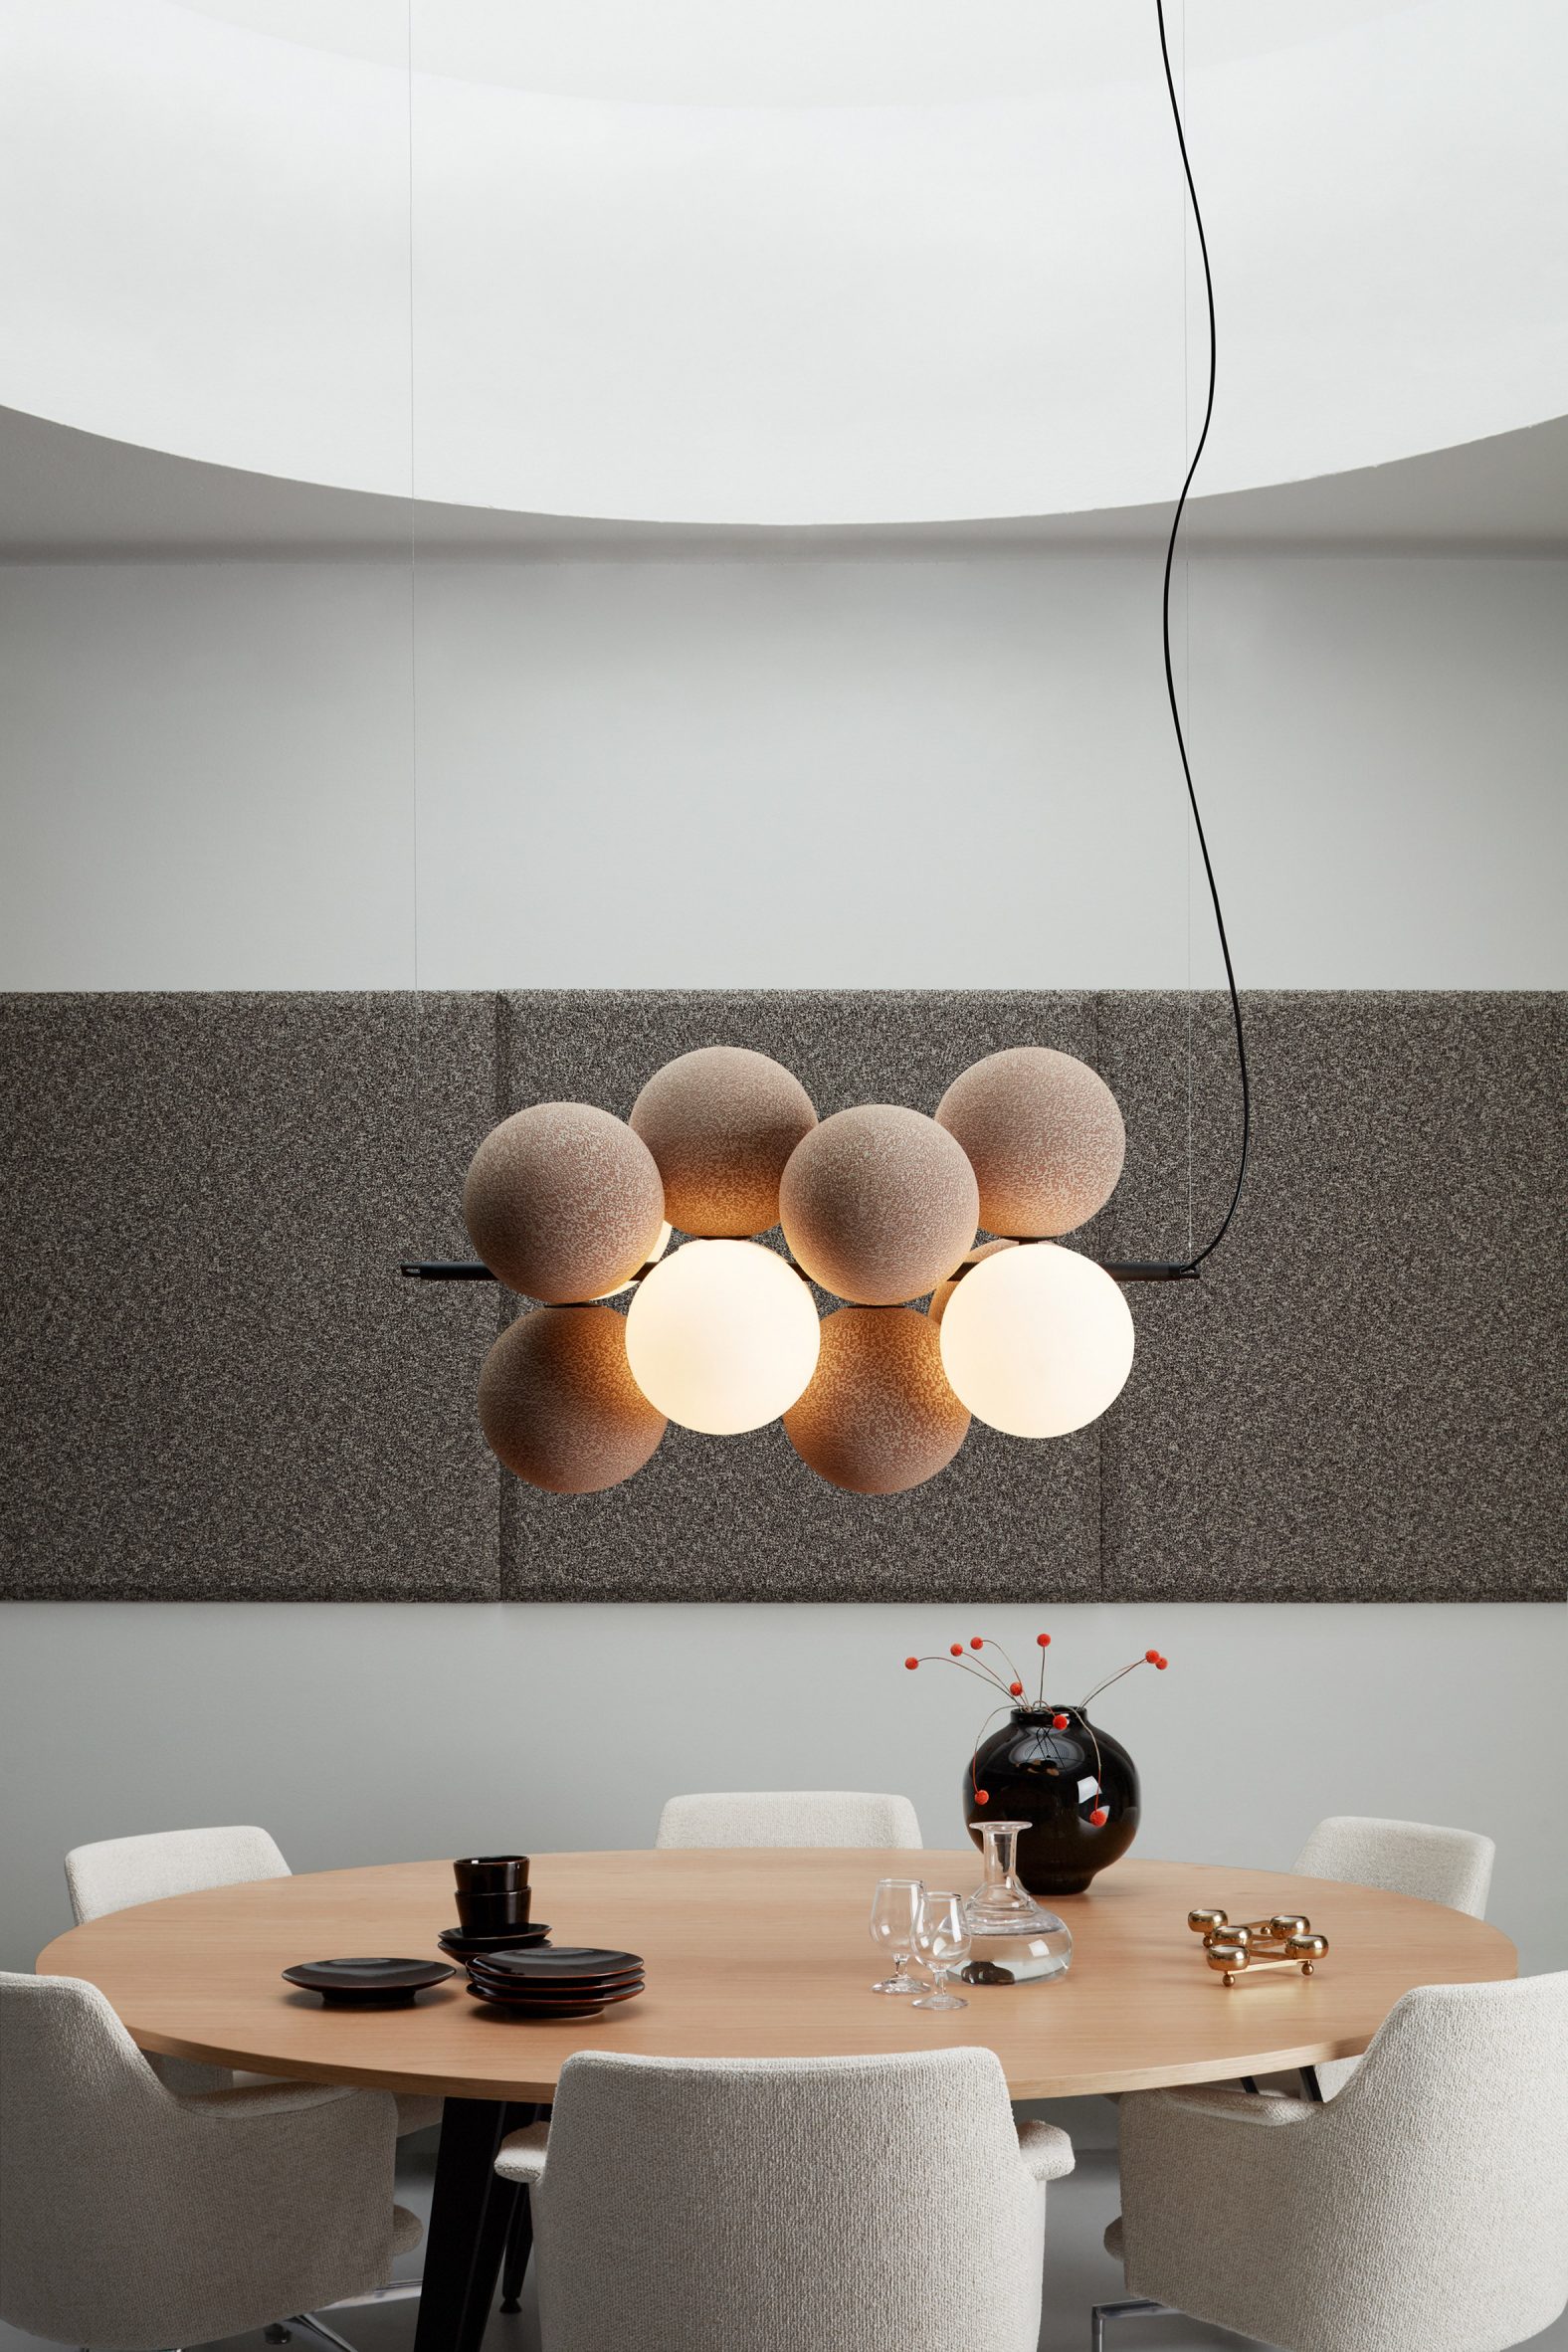 Holly lamp featuring round orb-like shapes by Runa Klock and Hallgeir Homstvedt for Abstracta